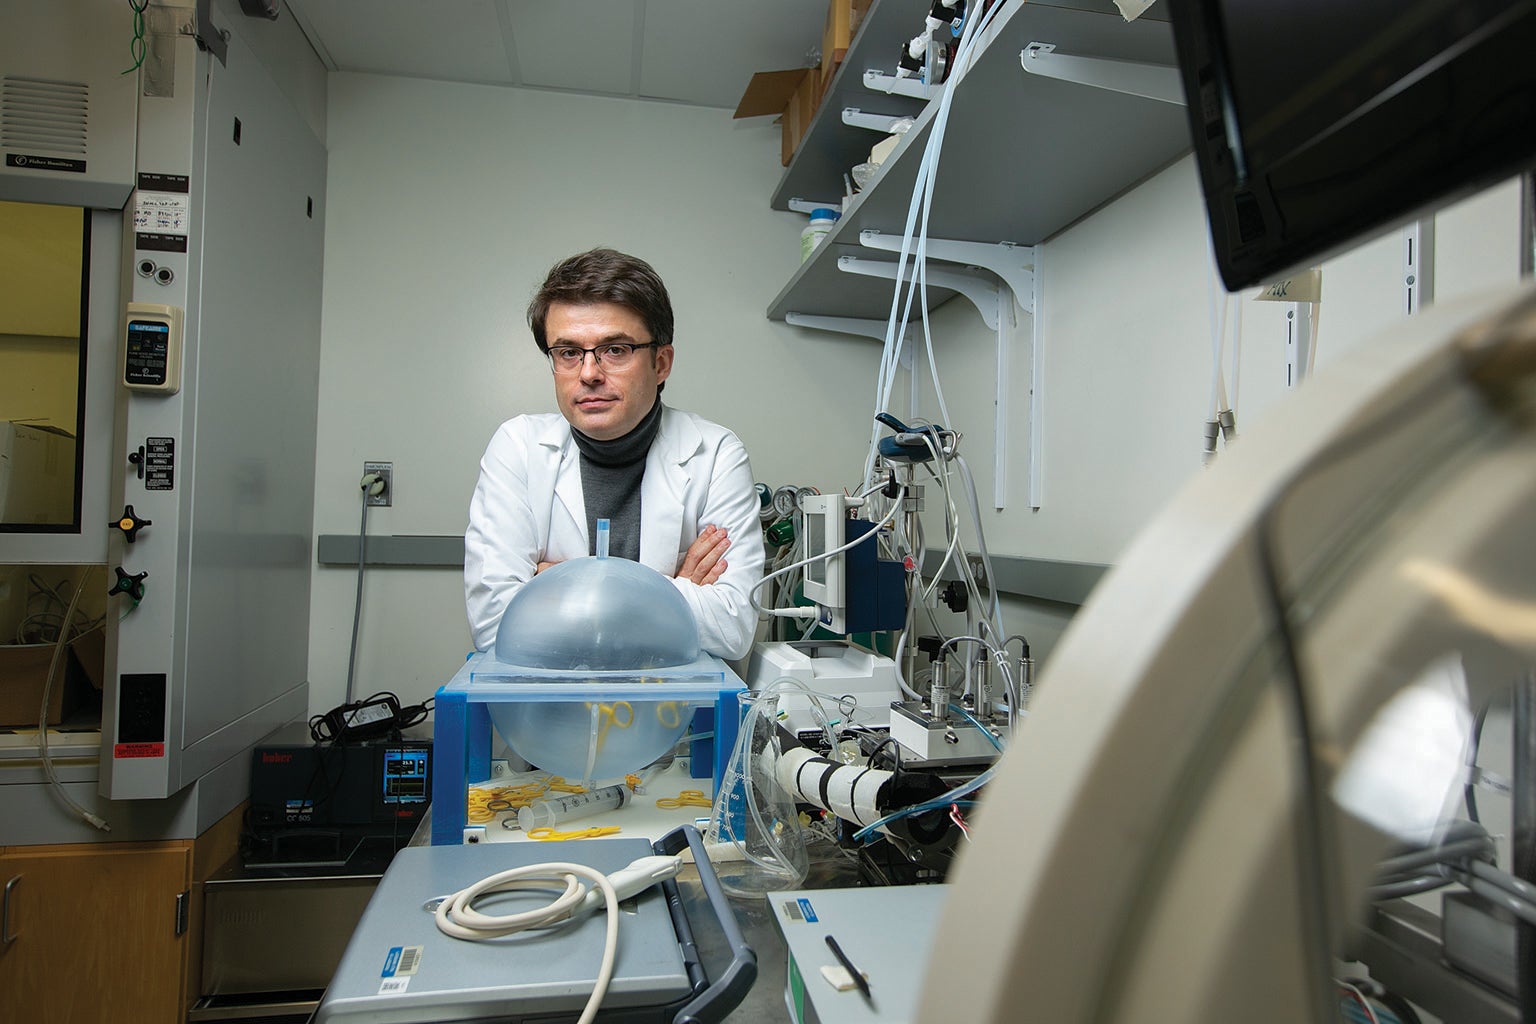 Neuroscientist Nenad Sestan in a lab staring at camera with his arms crossed.